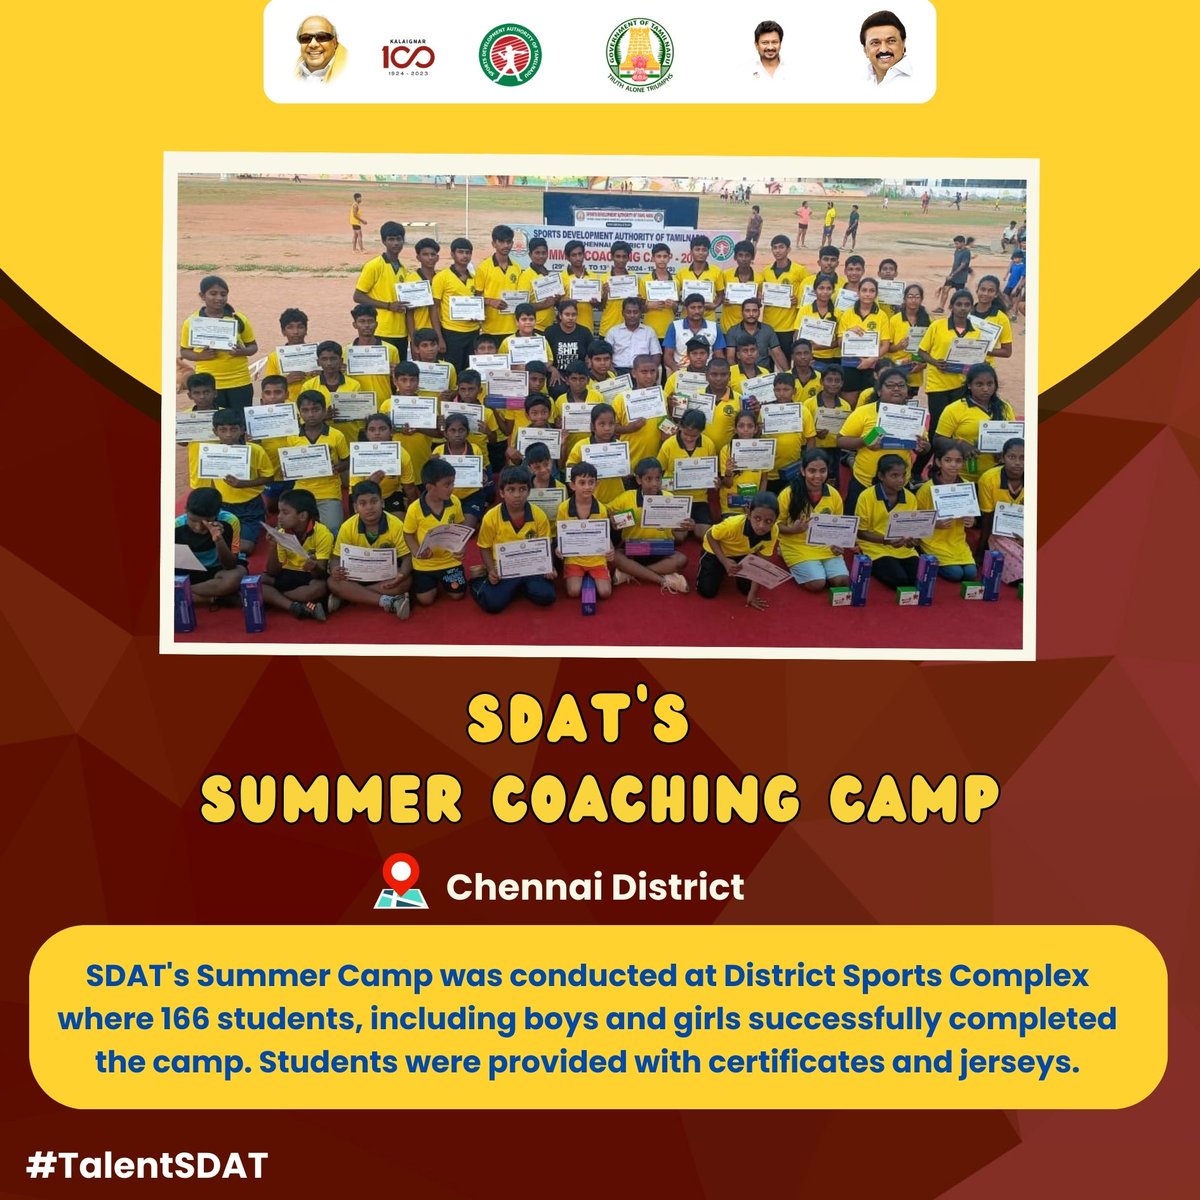 SDAT's Summer Coaching Camp was conducted at various District Sports Complexes and students who successfully completed the camp were provided with certificates and jerseys.
@CMOTamilnadu @Udhaystalin @TNDIPRNEWS

#SportsTN  #TalentSDAT